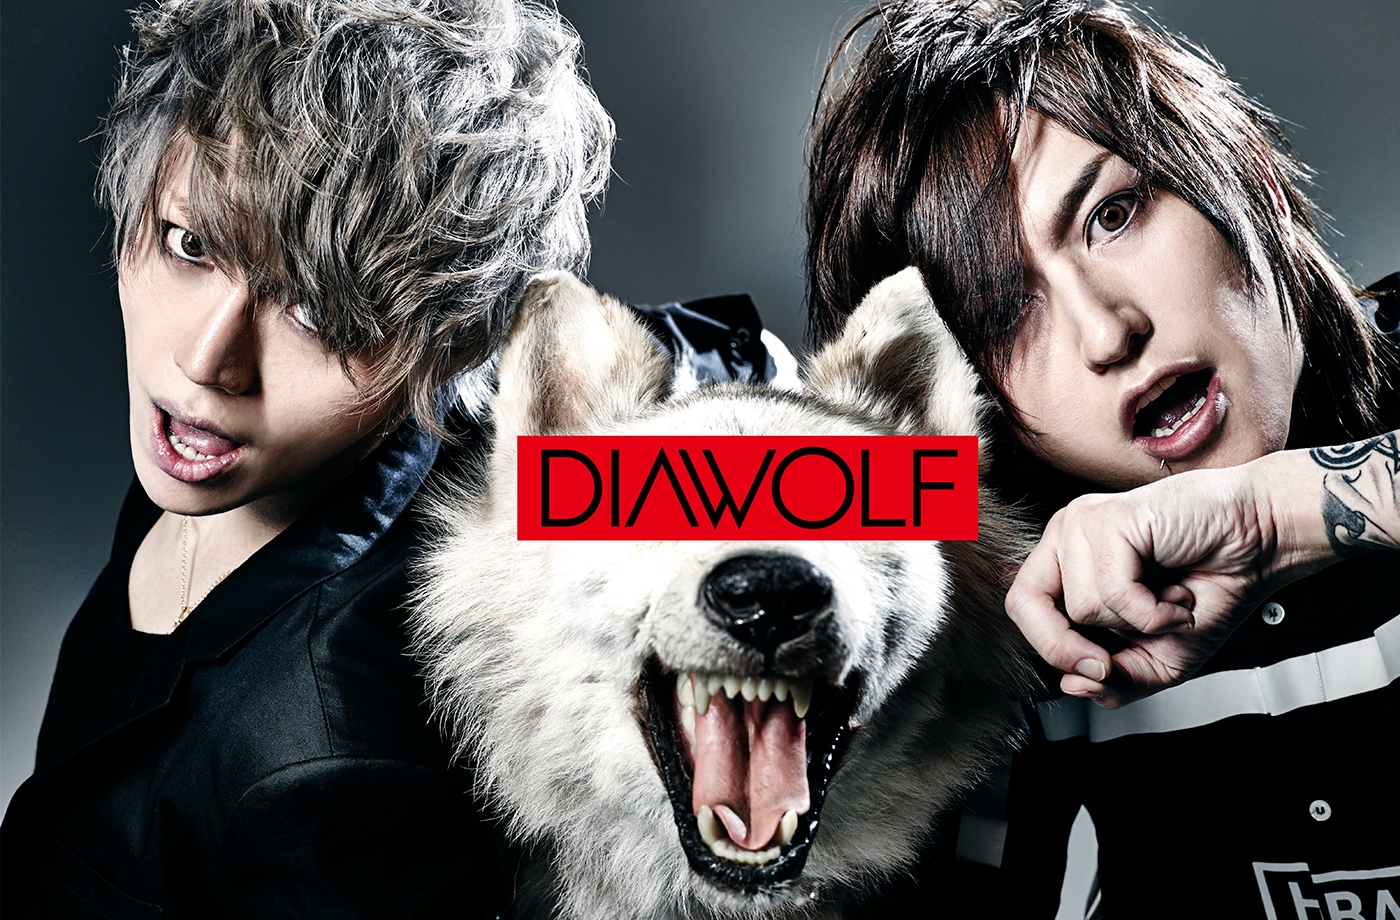 ＜Source：DIAWOLF  Official Website＞